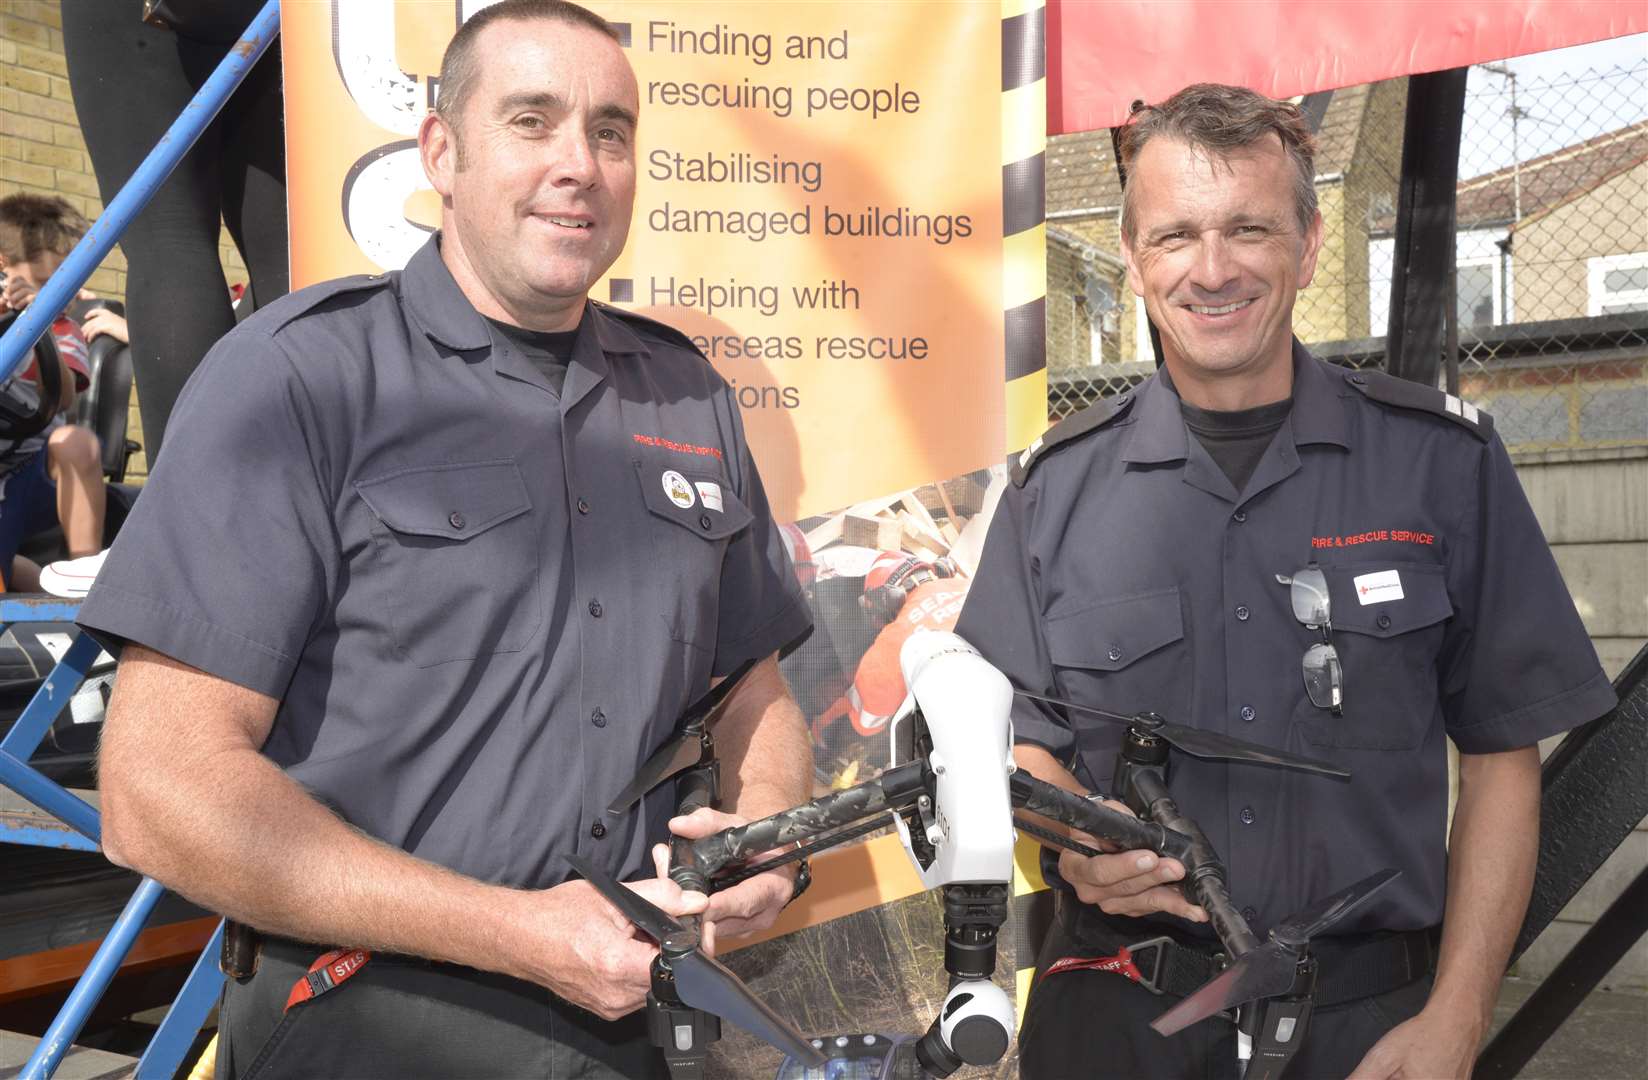 Firefighters Andy Parkes and Andy Taylor show off their drone at a Sheppey fire station open day